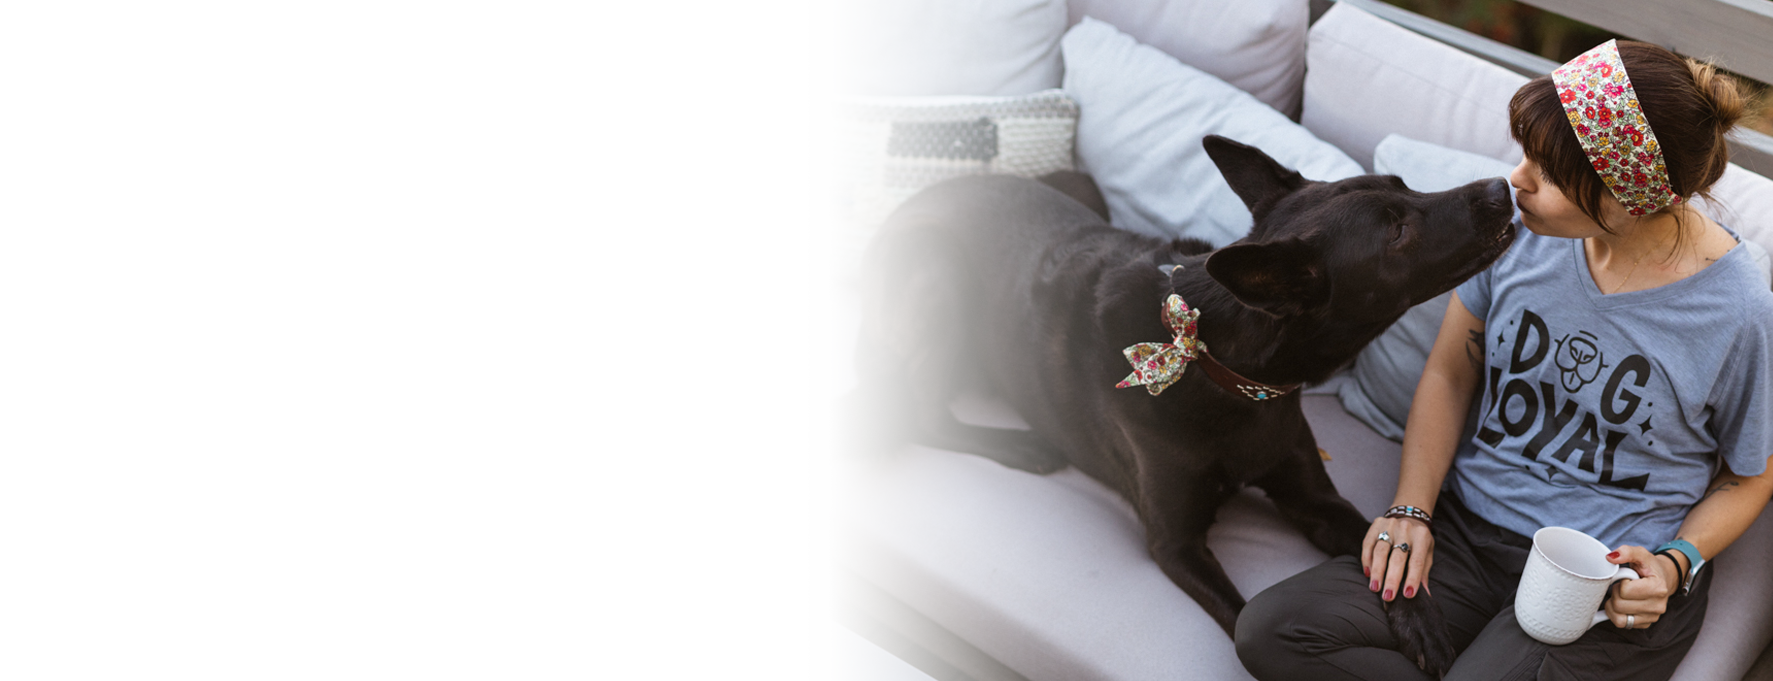 r107-dogmomteeheader-16939520040471.png